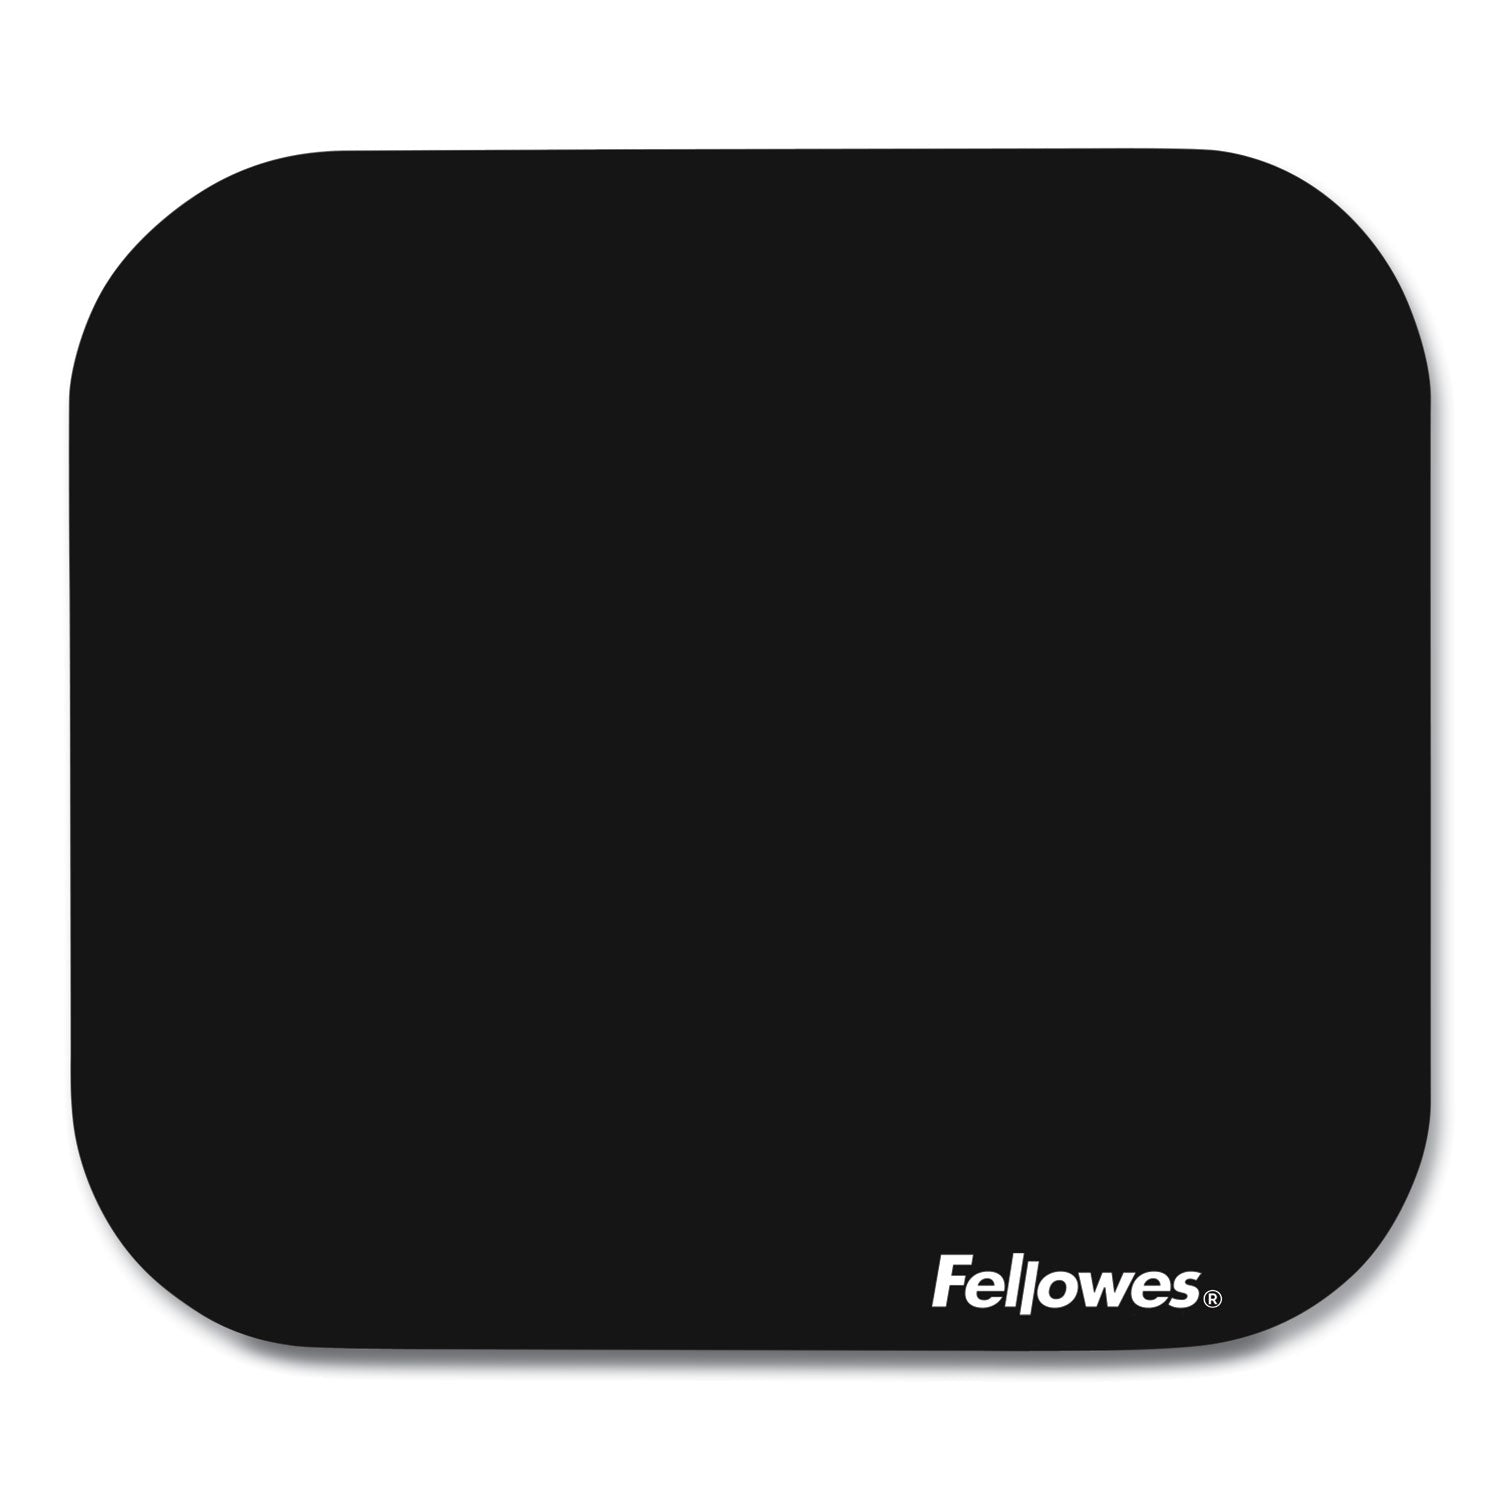 Polyester Mouse Pad, 9 x 8, Black - 